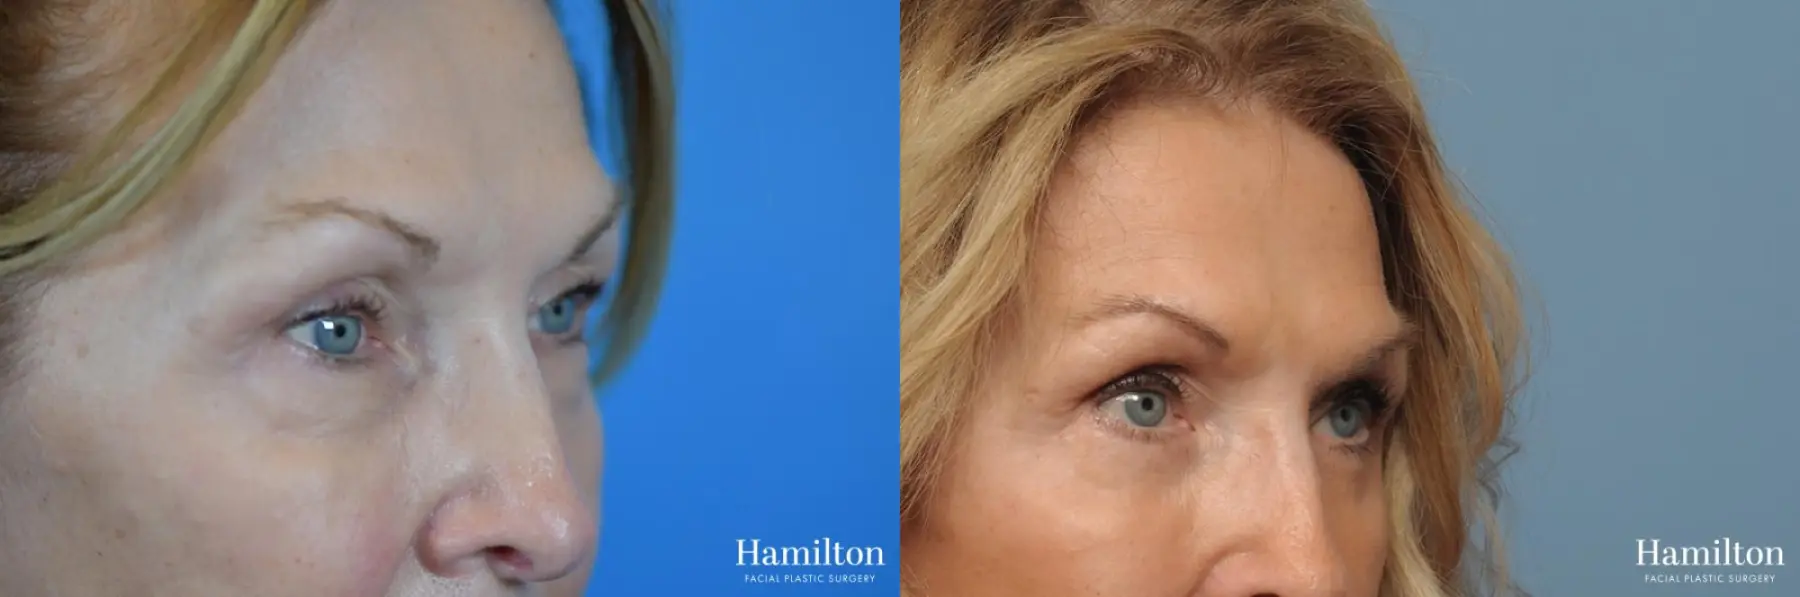 Blepharoplasty: Patient 5 - Before and After 5